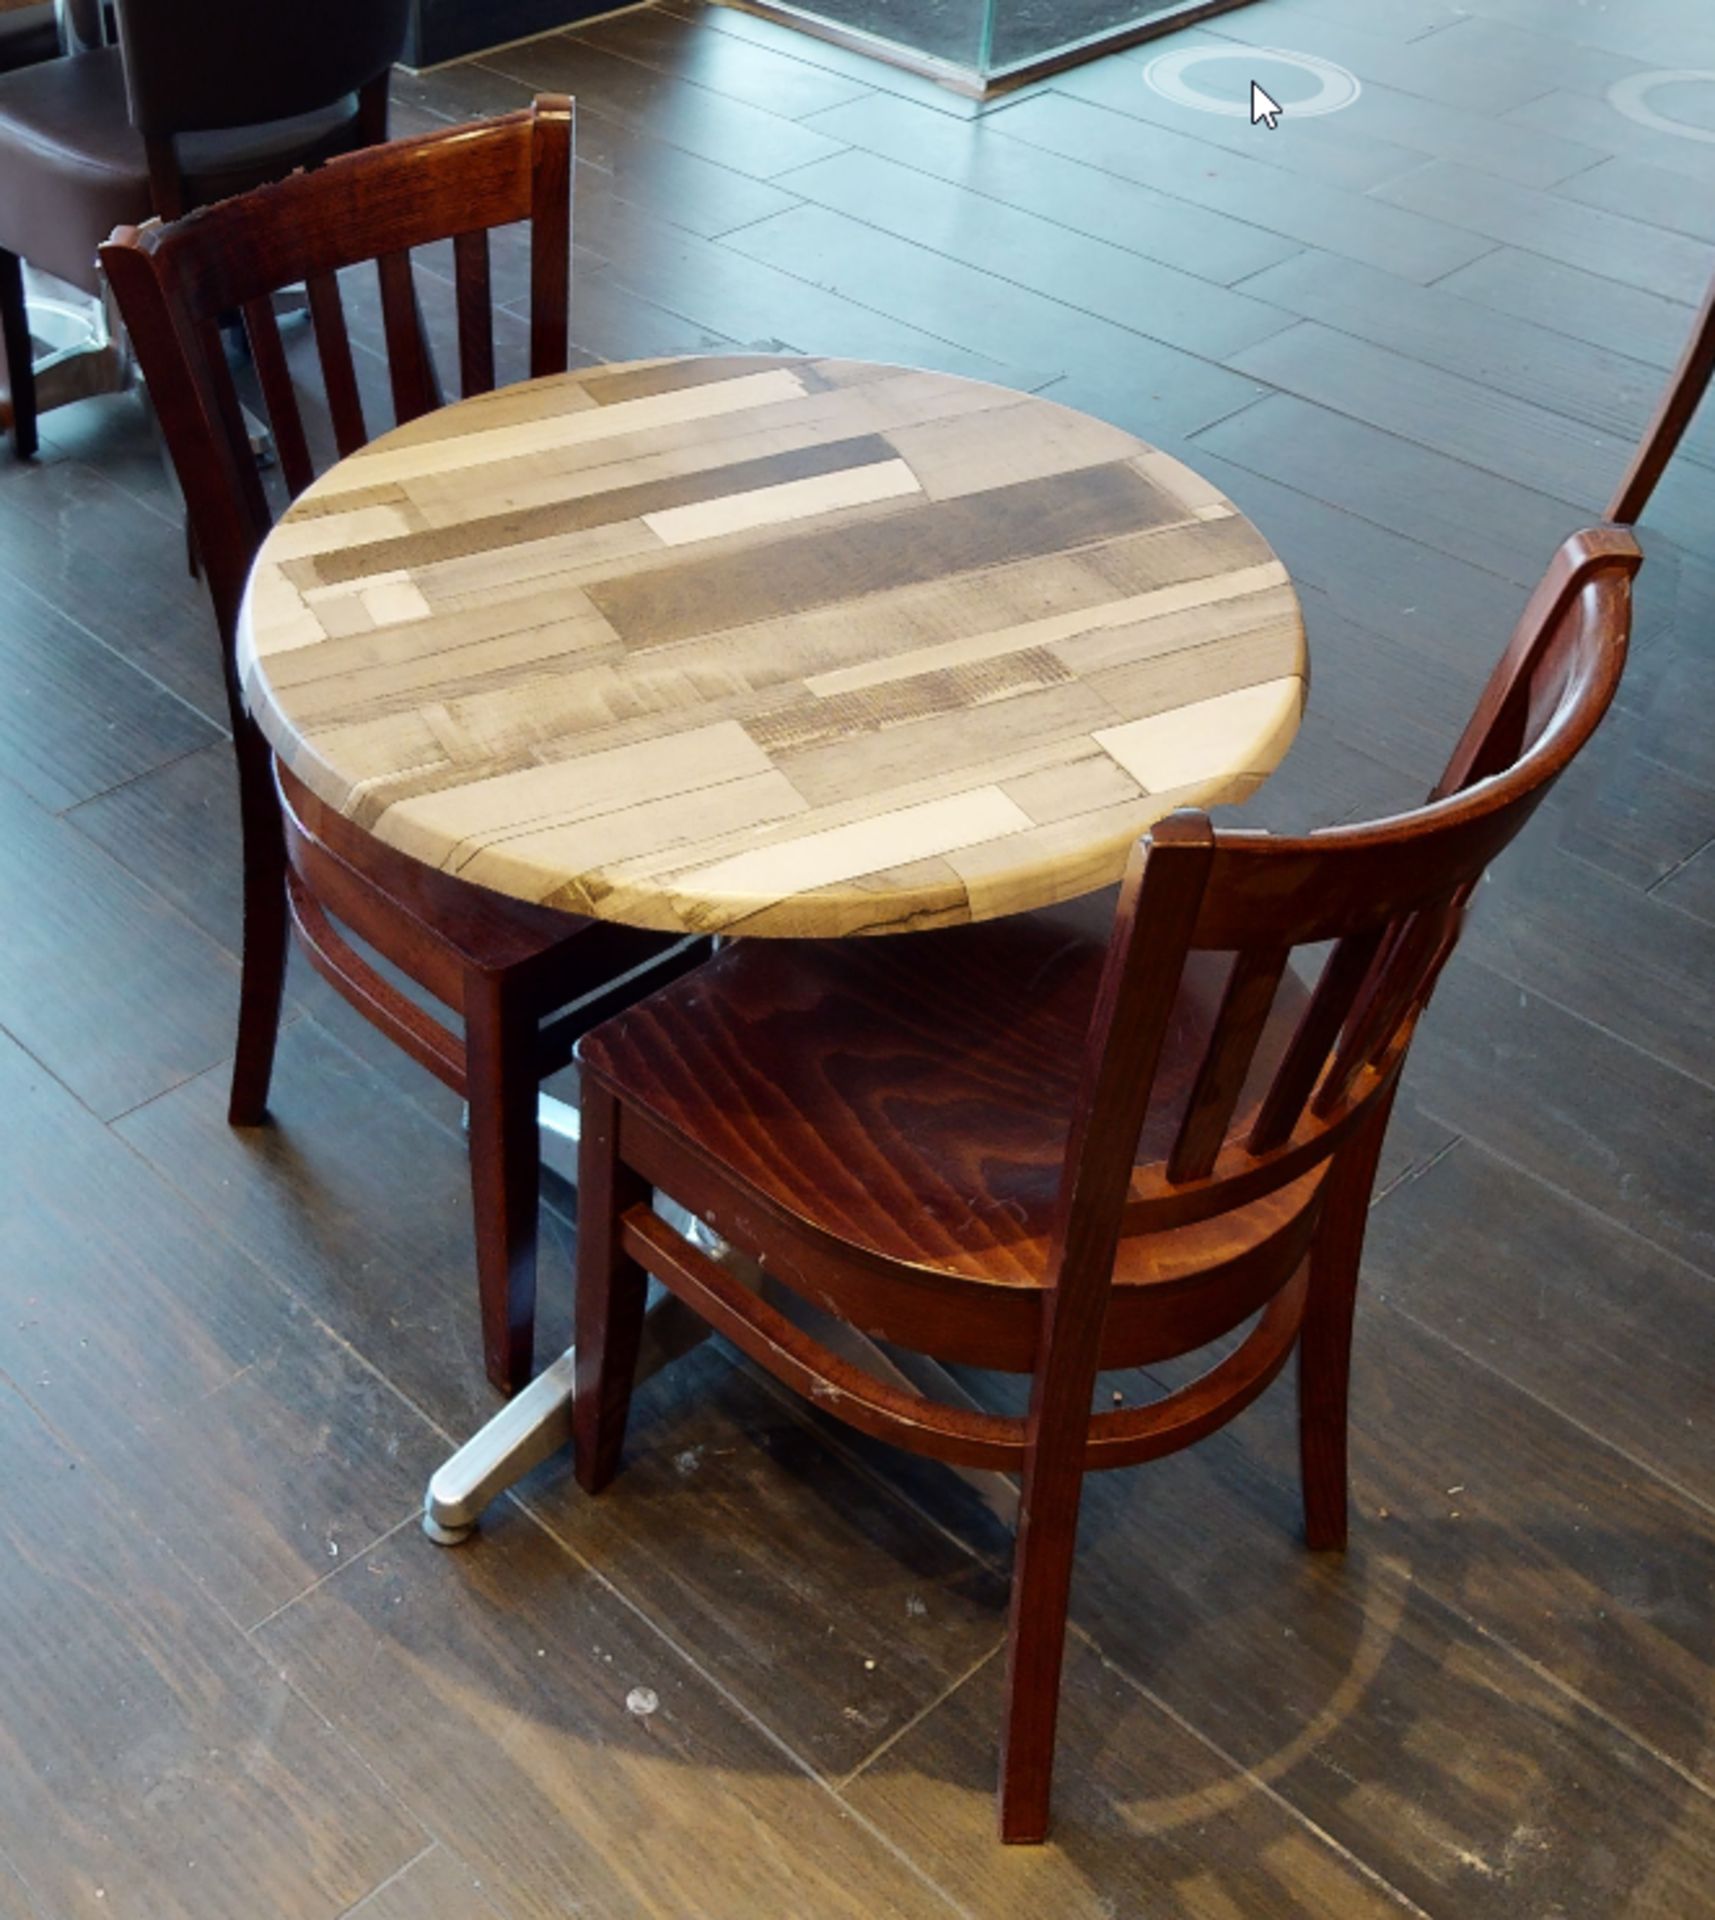 10 x Two Seater Restaurant Tables With Wood Panel Effect Tops and Chromes Bases - CL701 - - Image 5 of 9